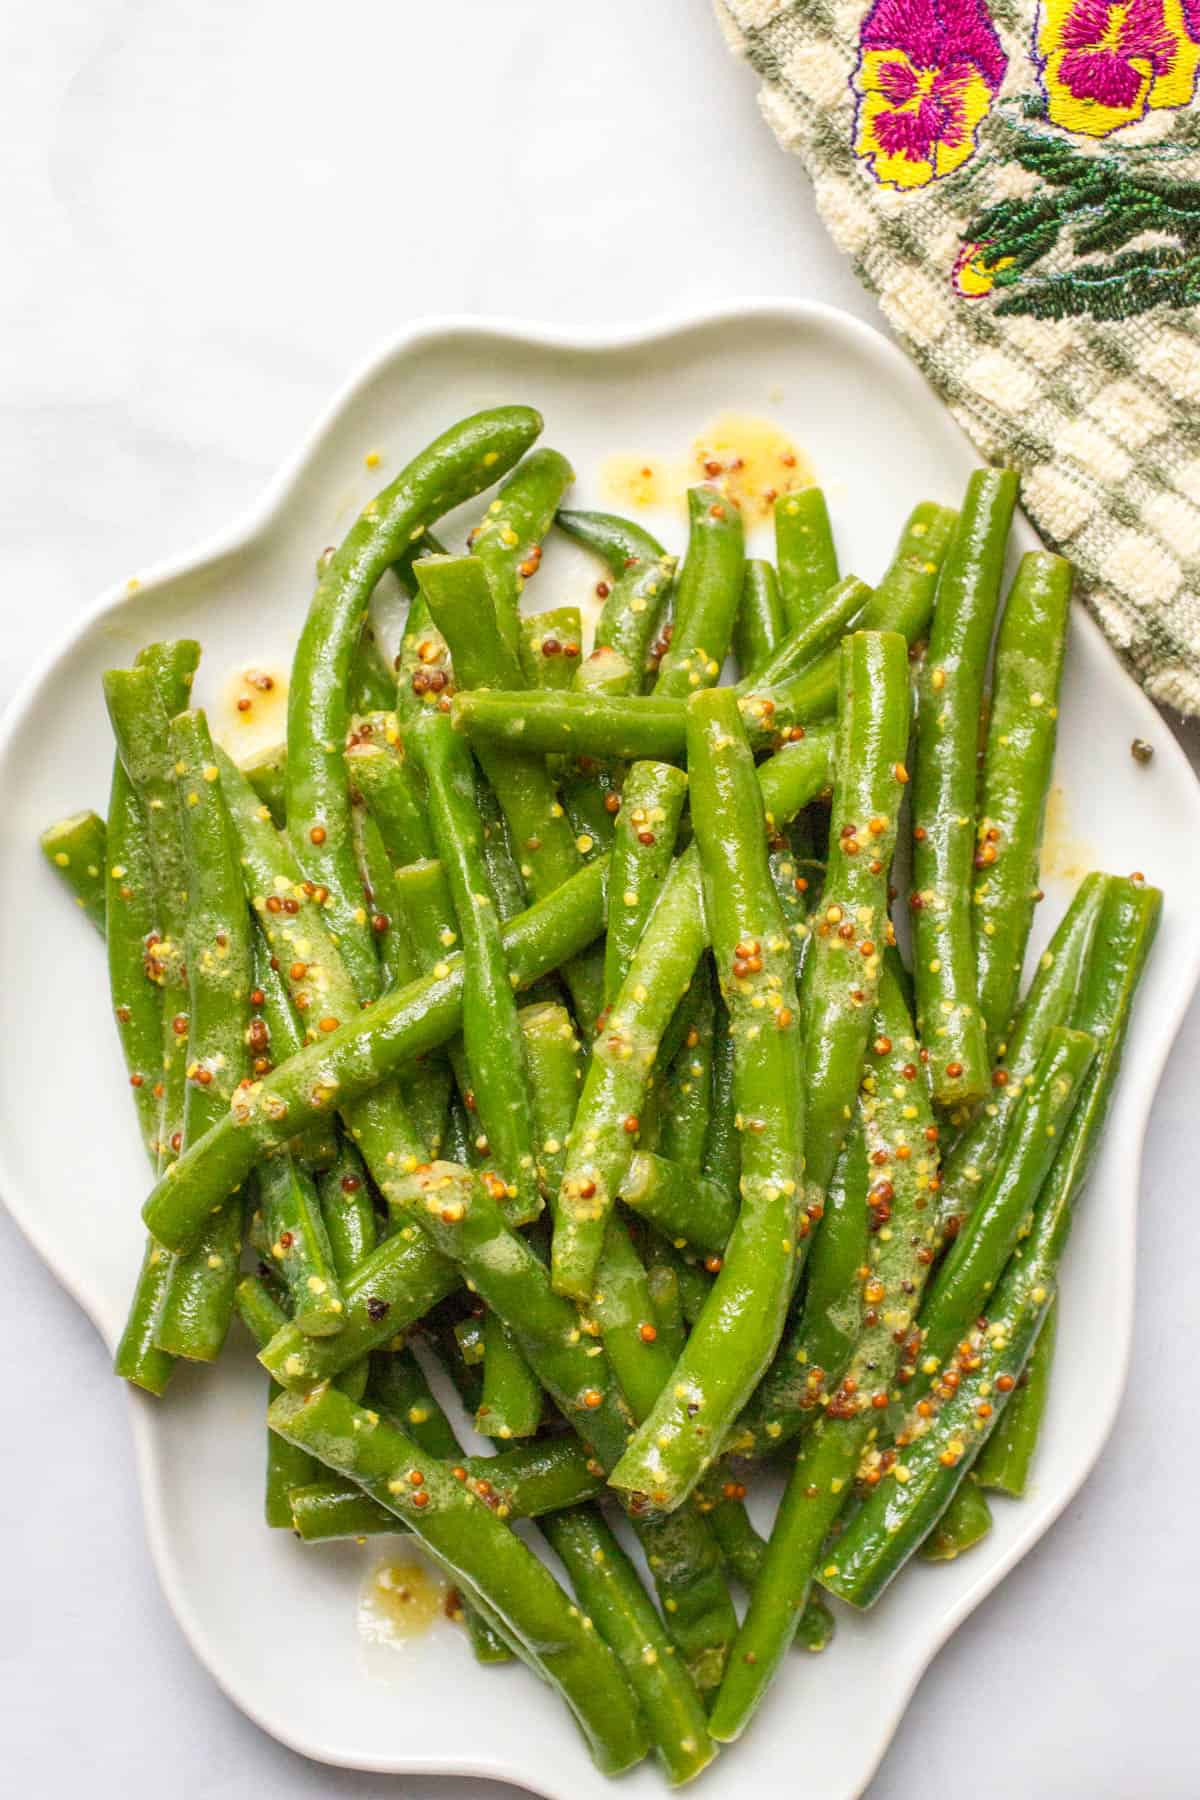 Green beans with mustard butter sauce served on a white platter.